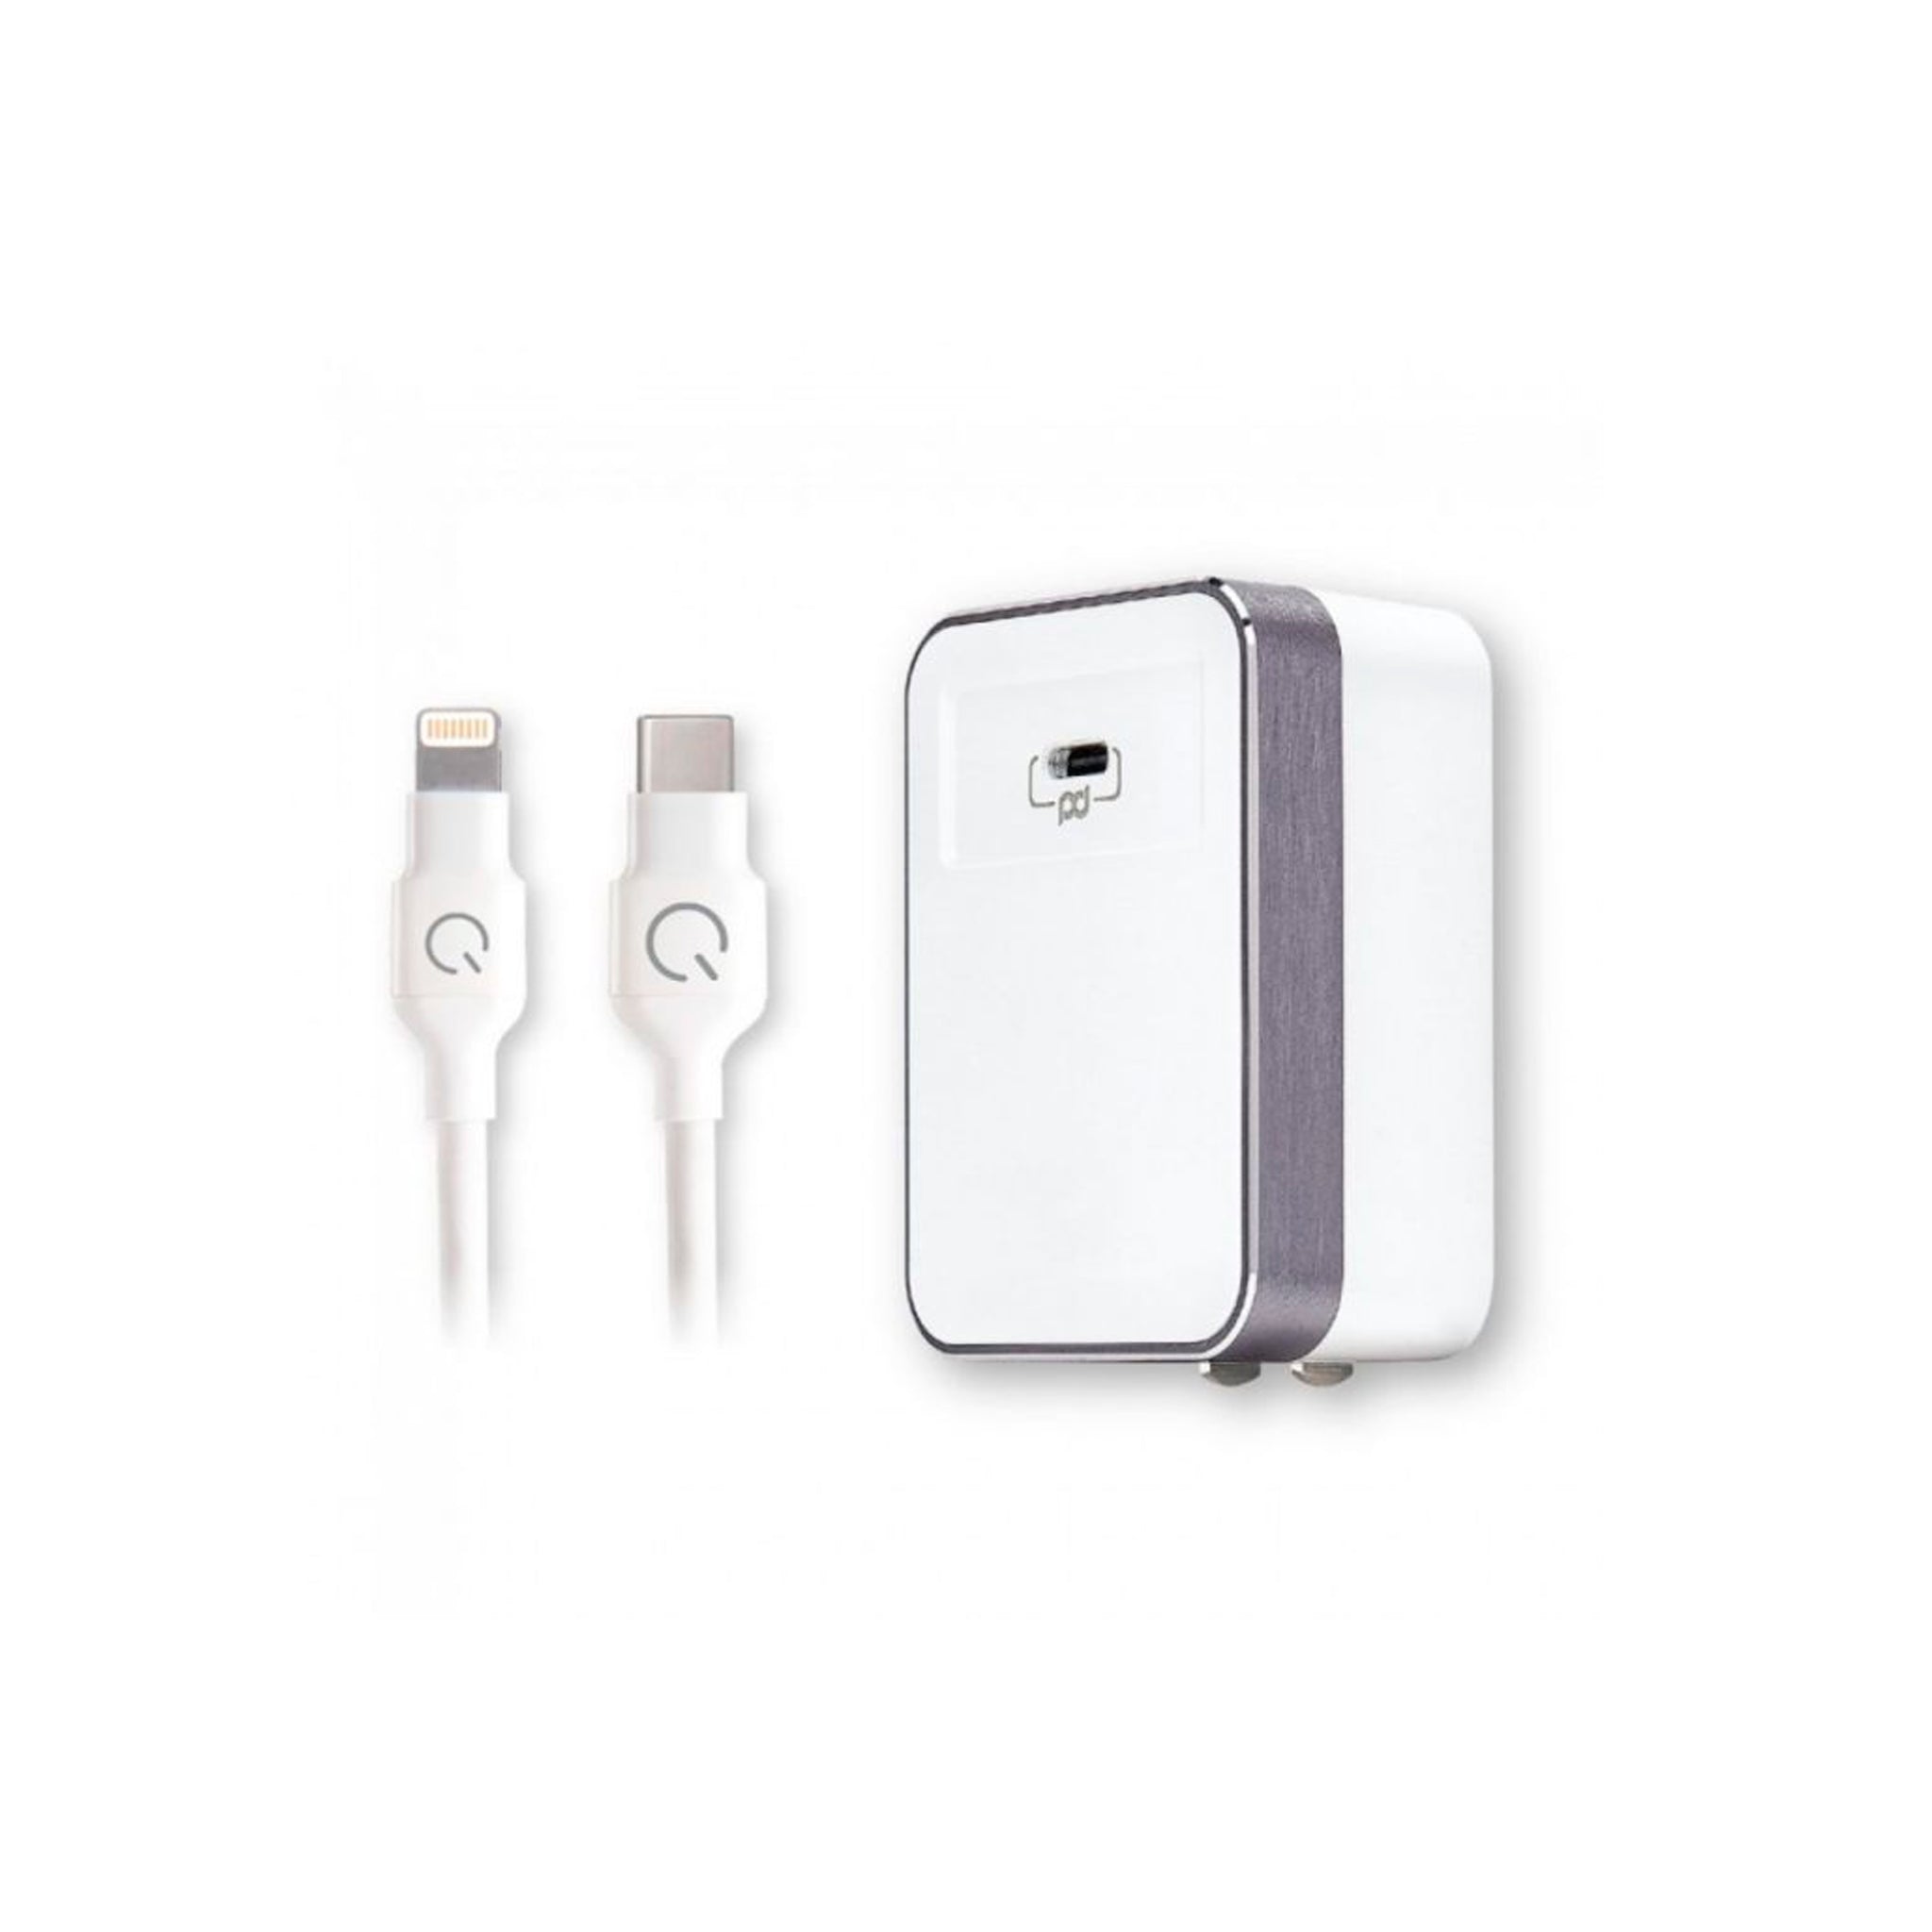 Qmadix - Wall Charger Power Delivery For Apple Lightning Devices - White